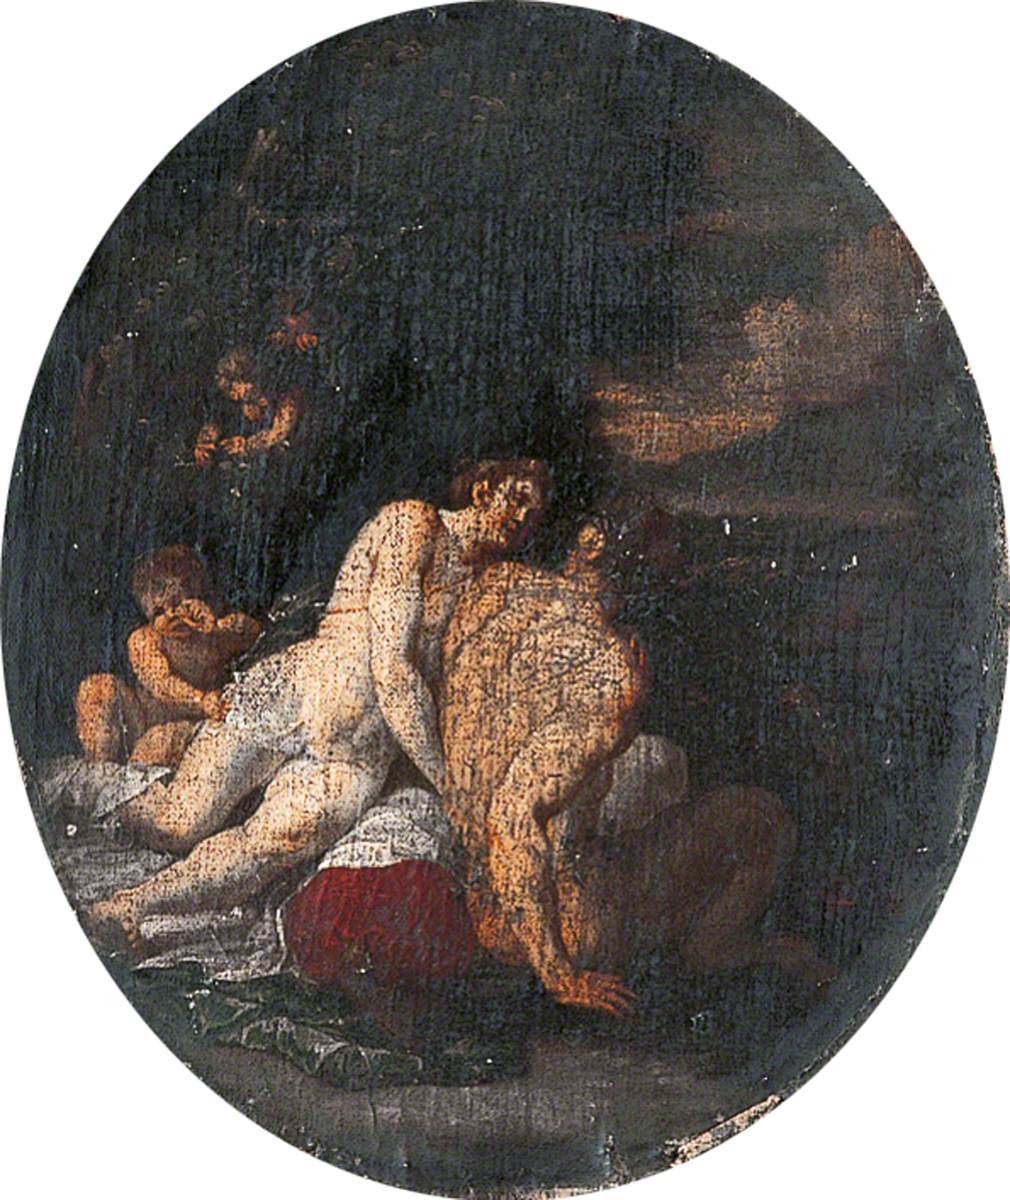 Nymph and Satyr with Putti